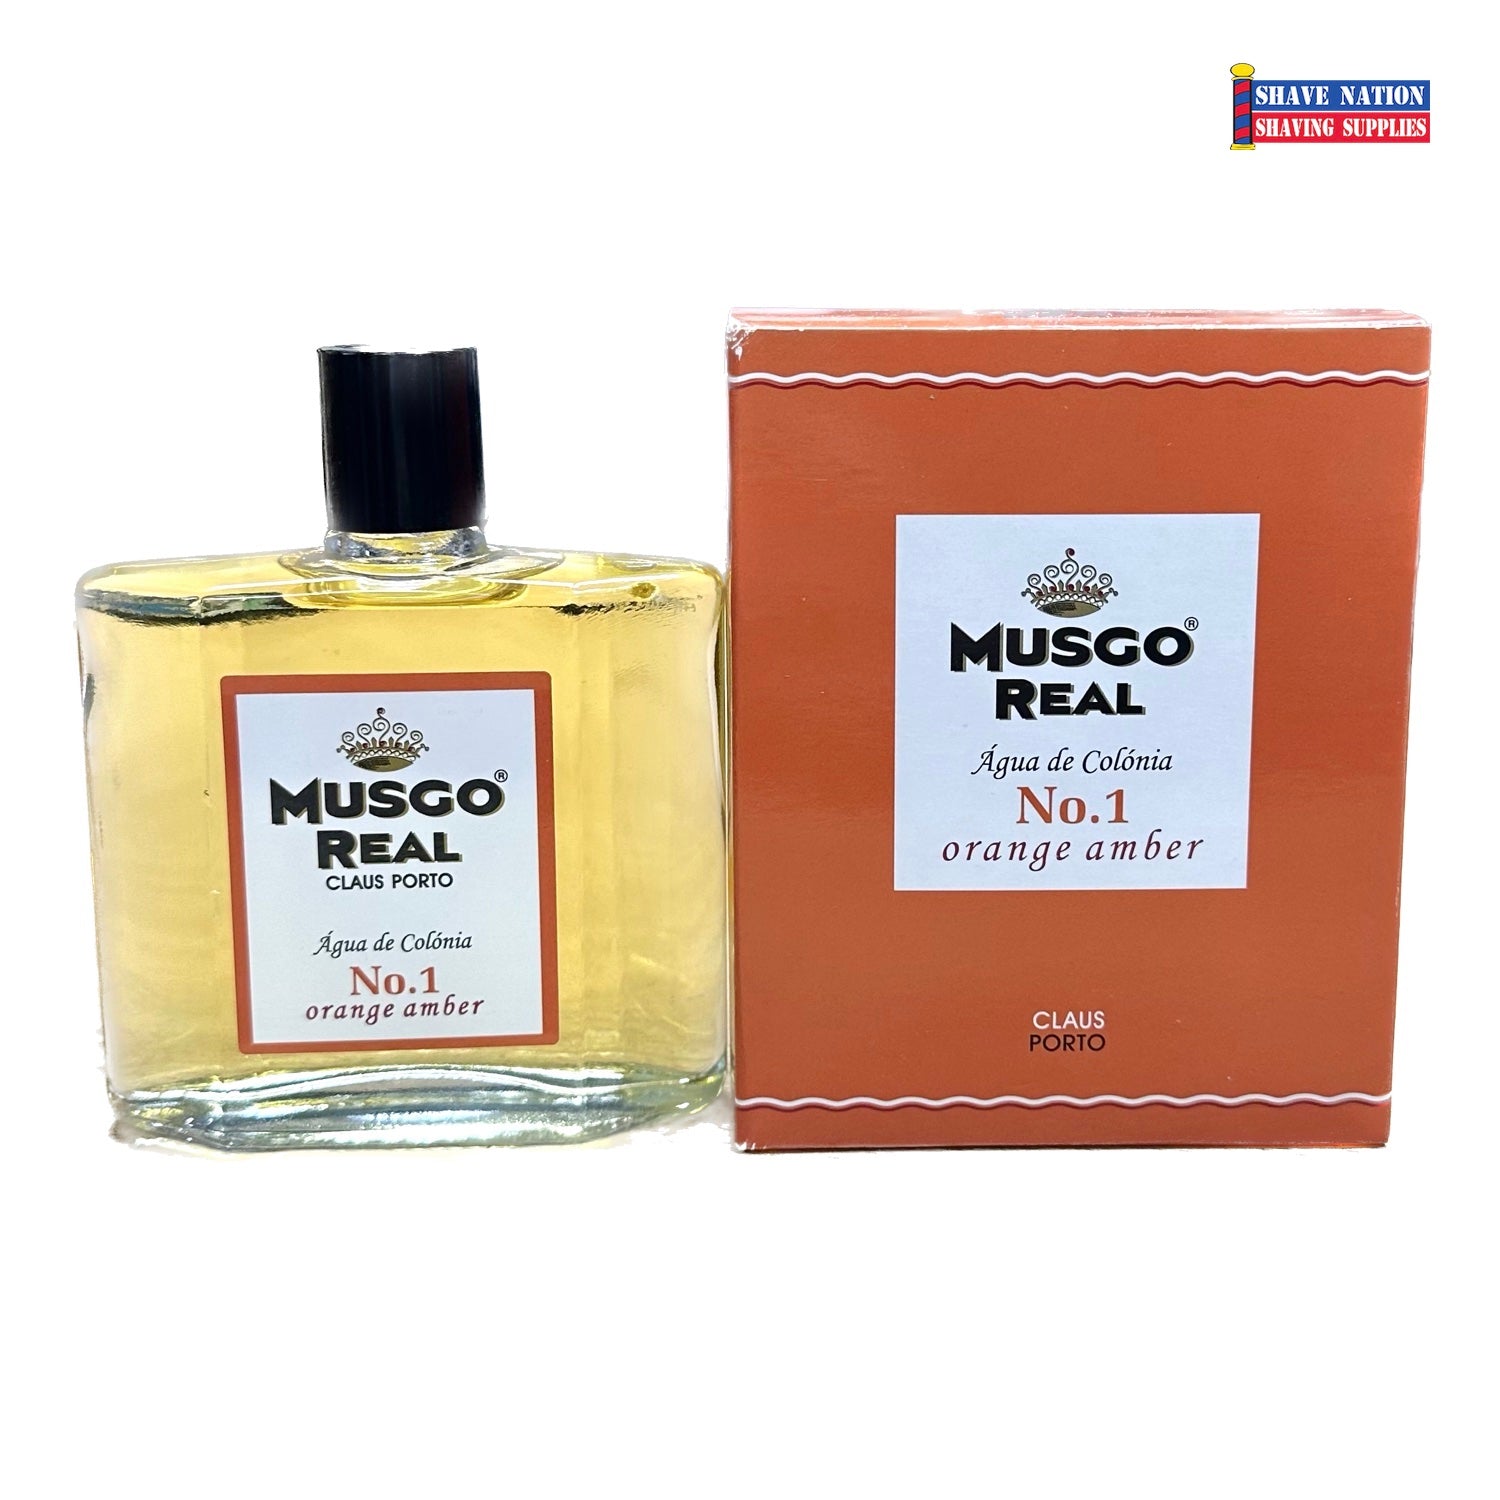 Claus Porto Musgo Real Classic Scent Aftershave Balm, 100 mL Claus Porto